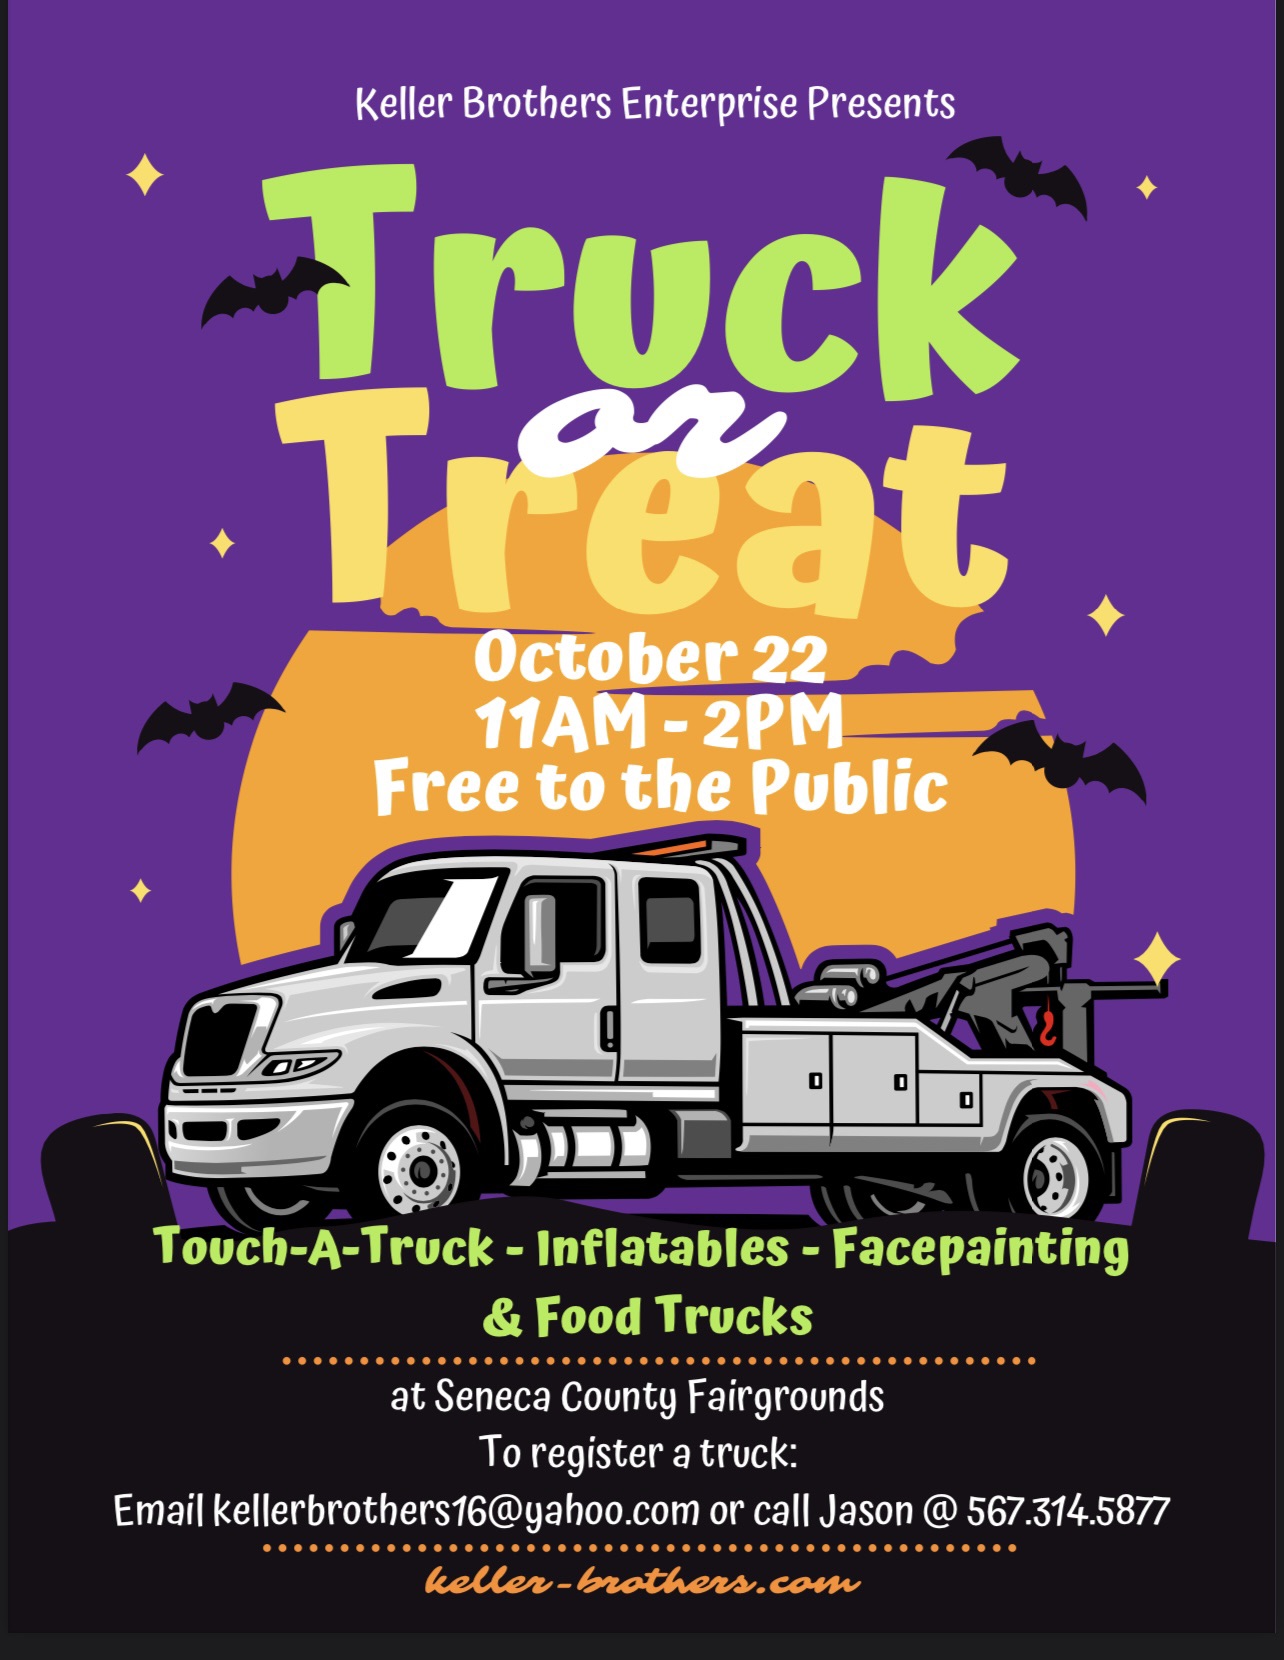 Truck or Treat